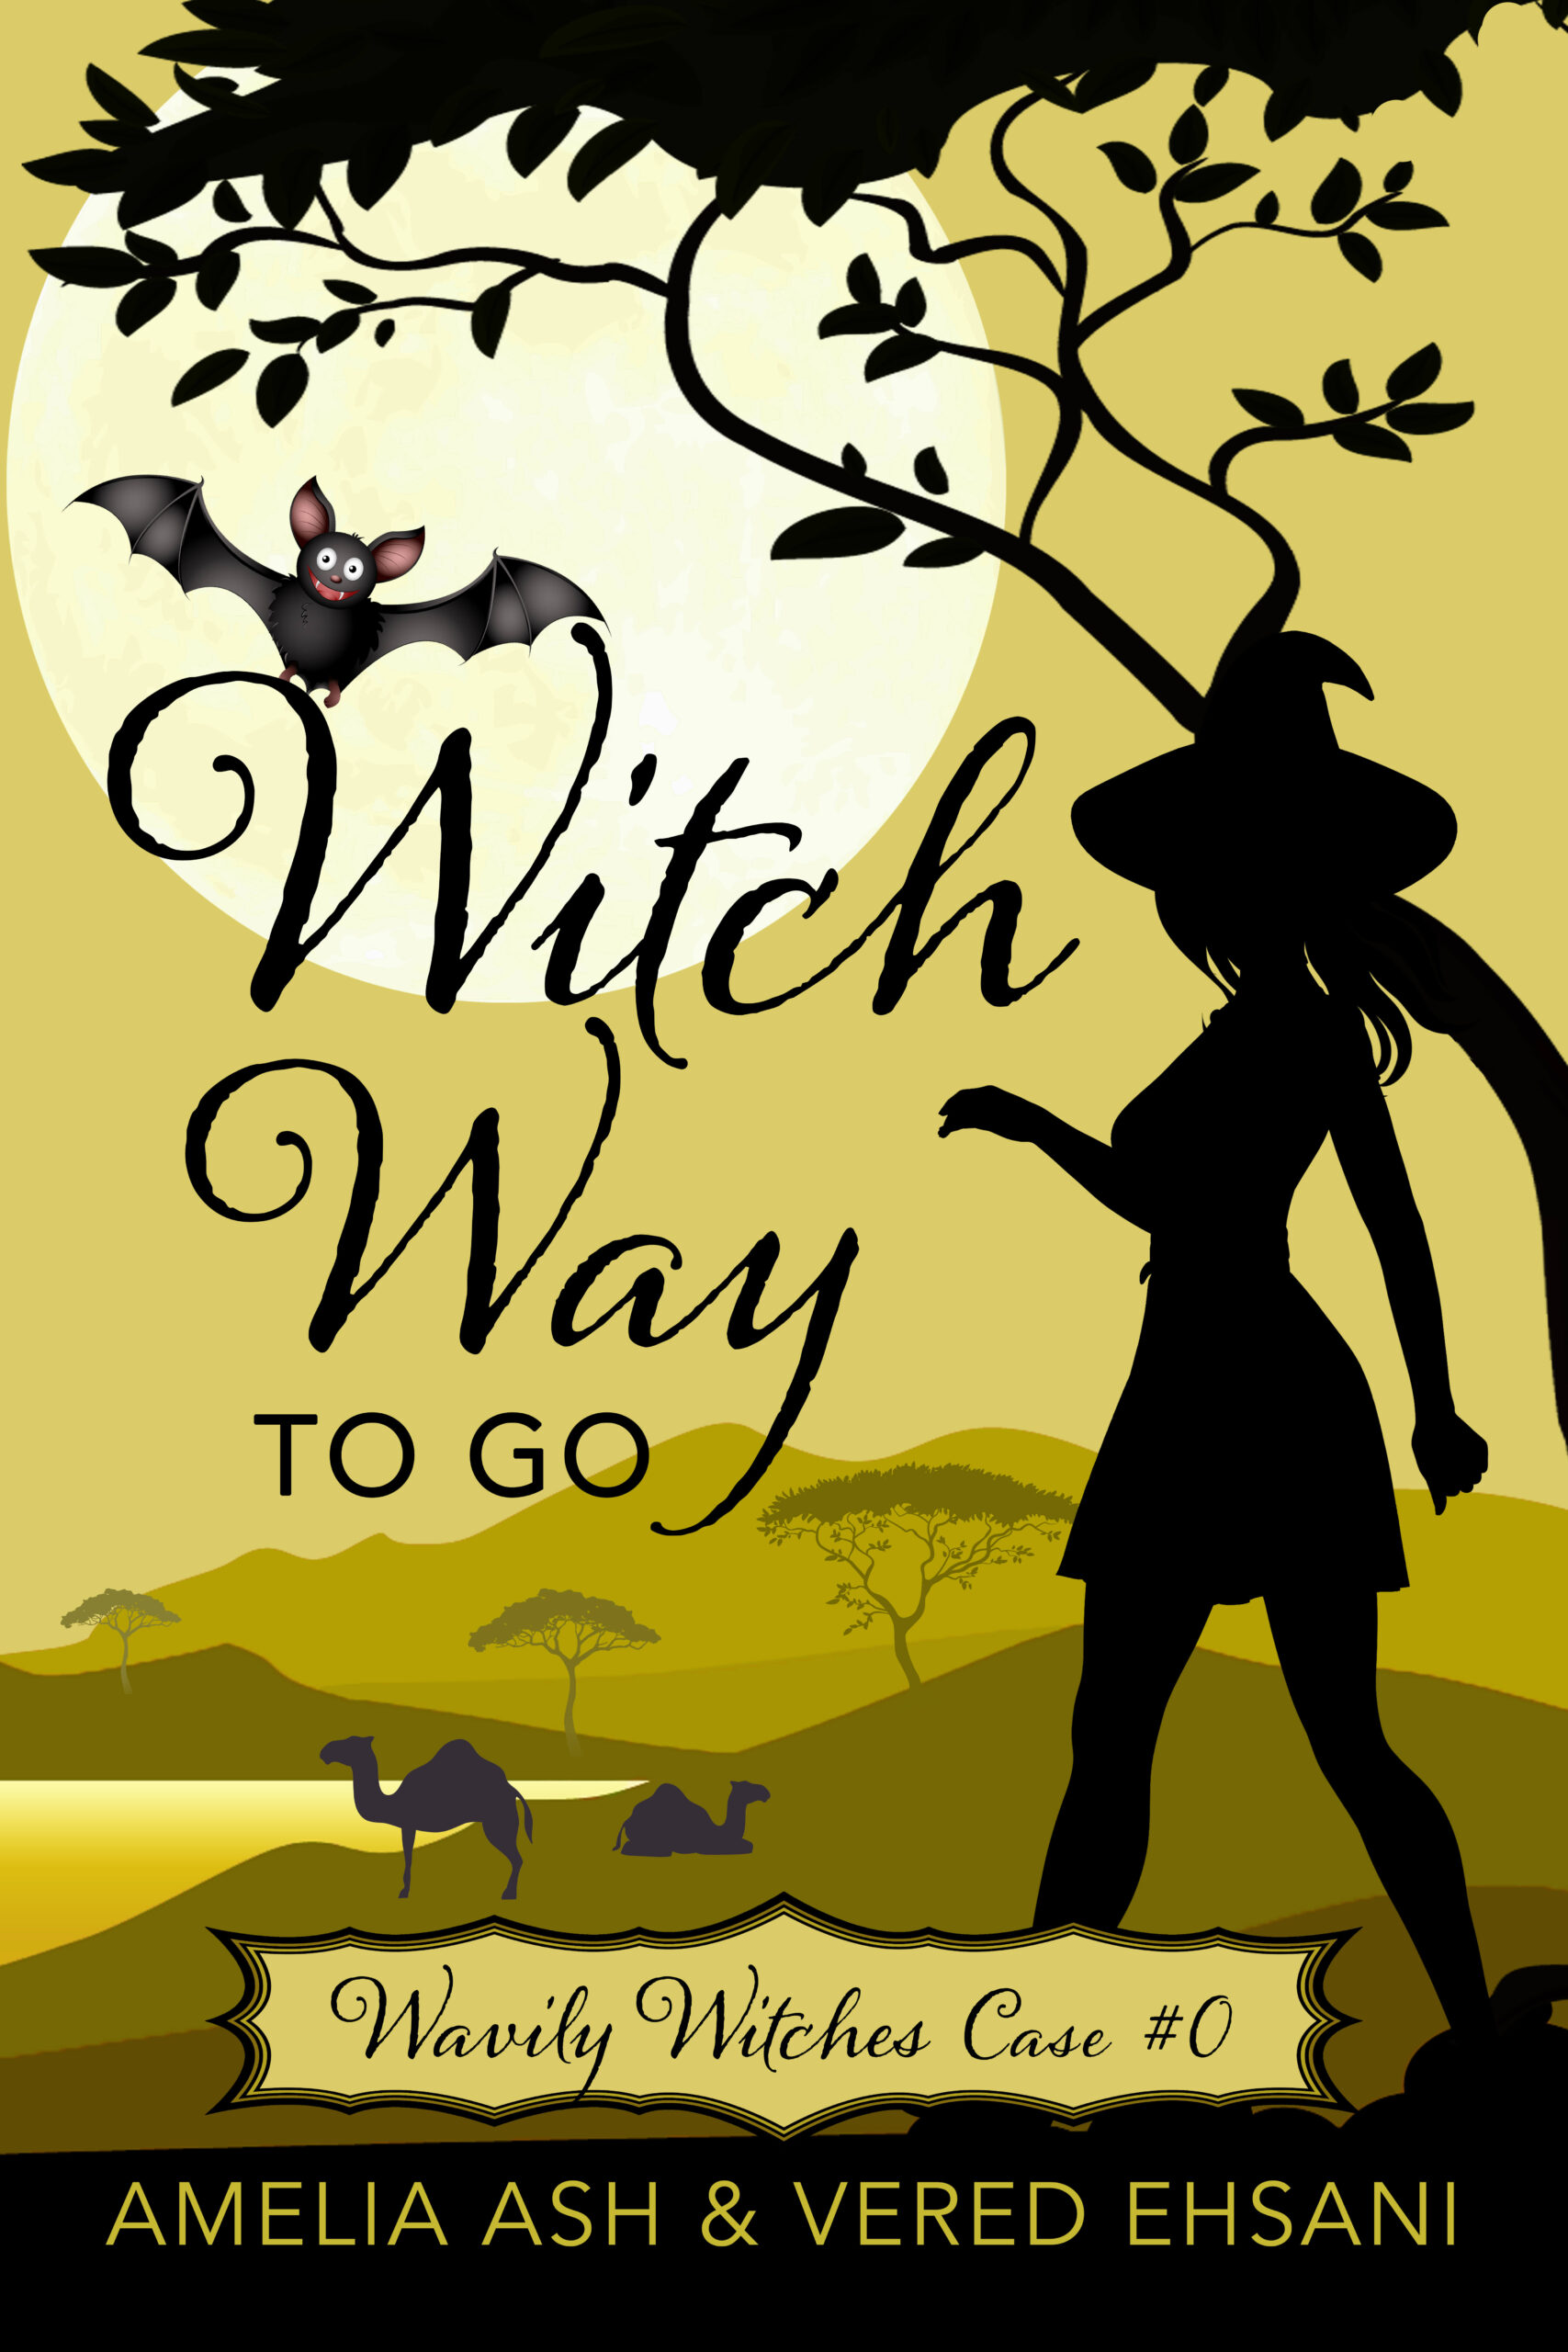 FREE: Witch Way To Go by Vered Ehsani